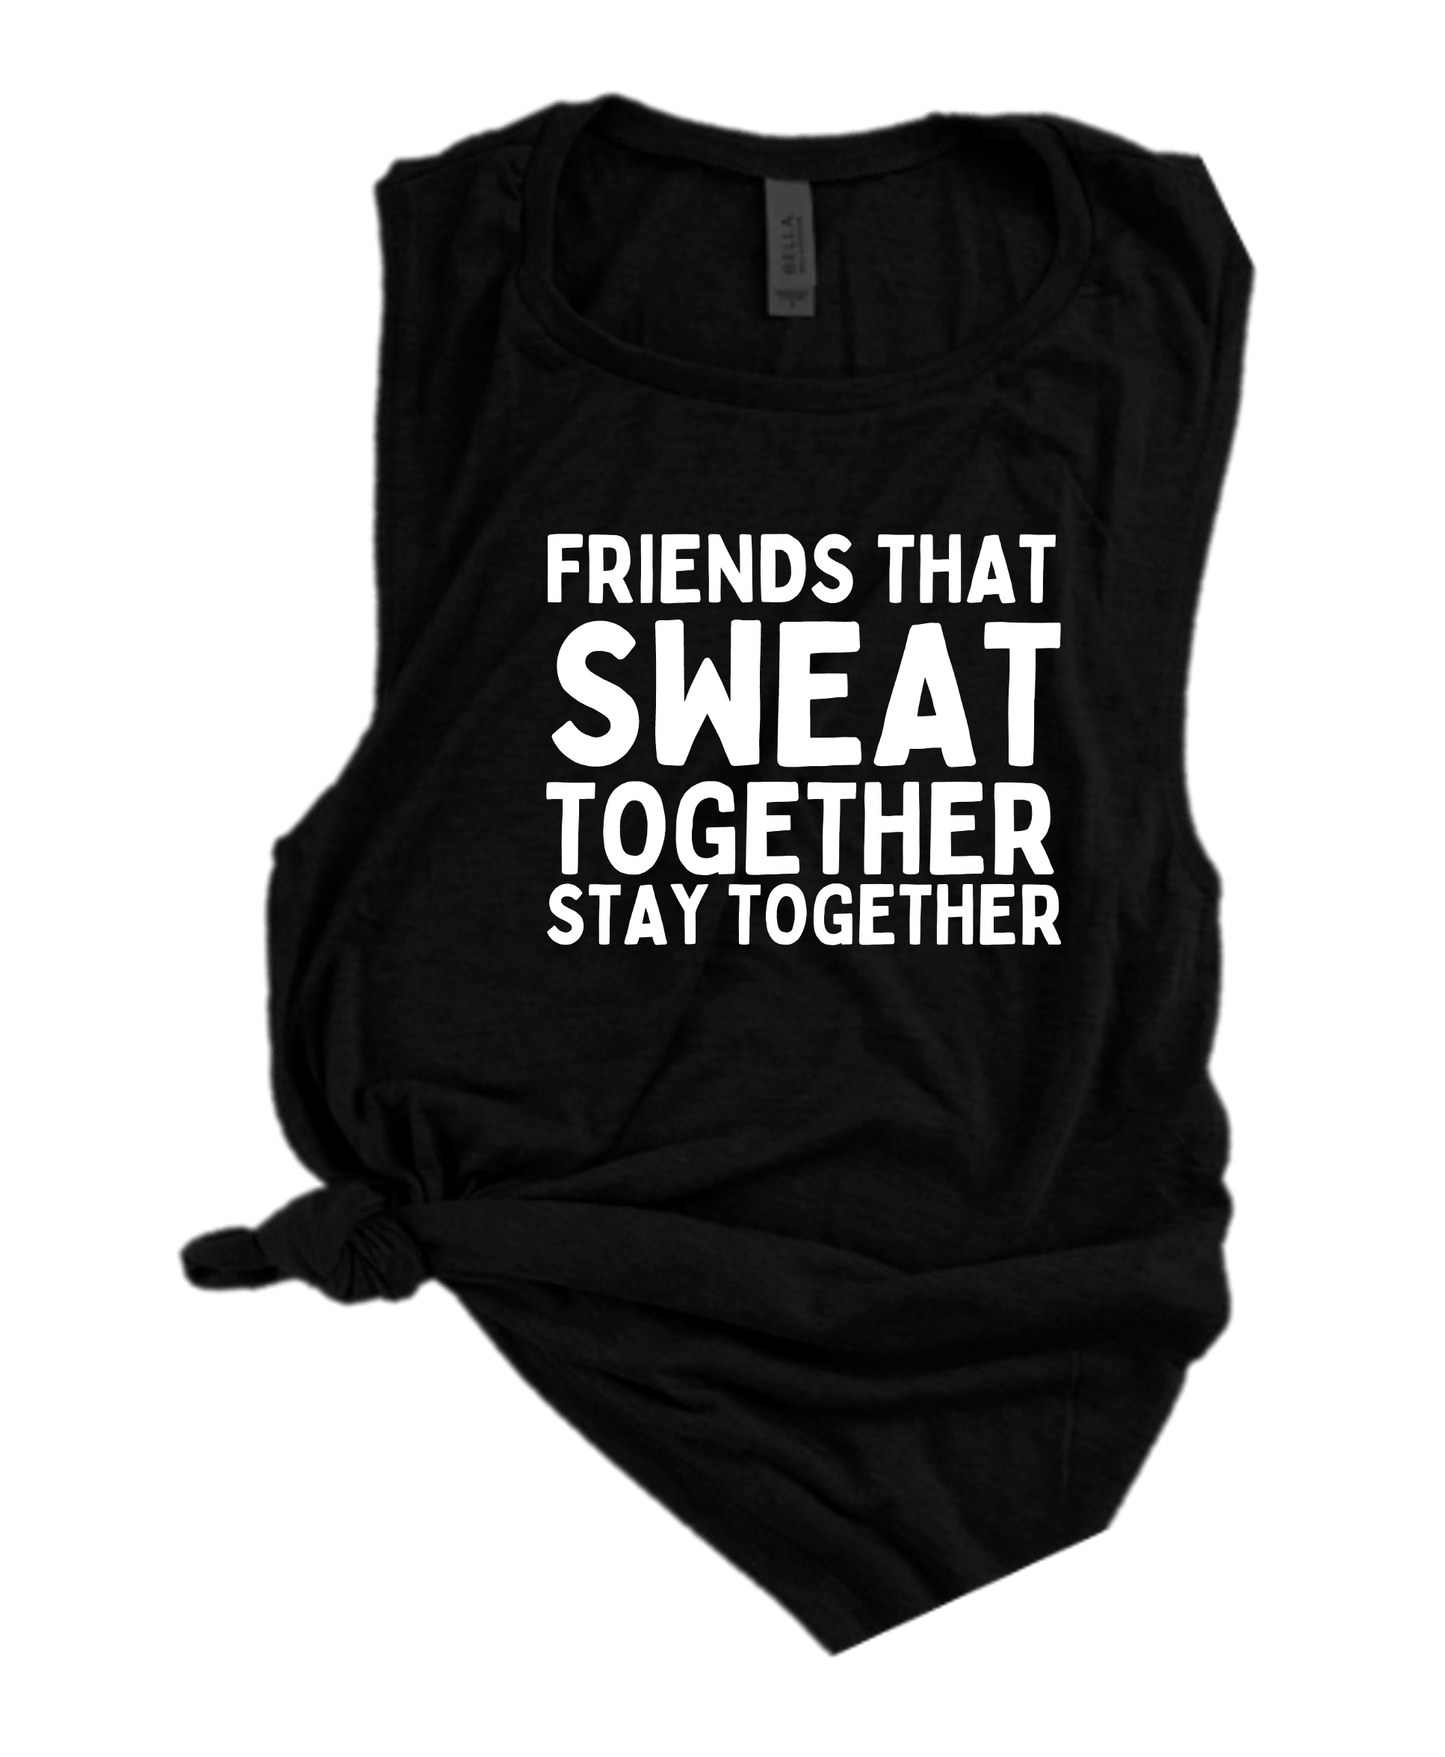 FRIENDS THAT SWEAT TOGETHER STAY TOGETHER